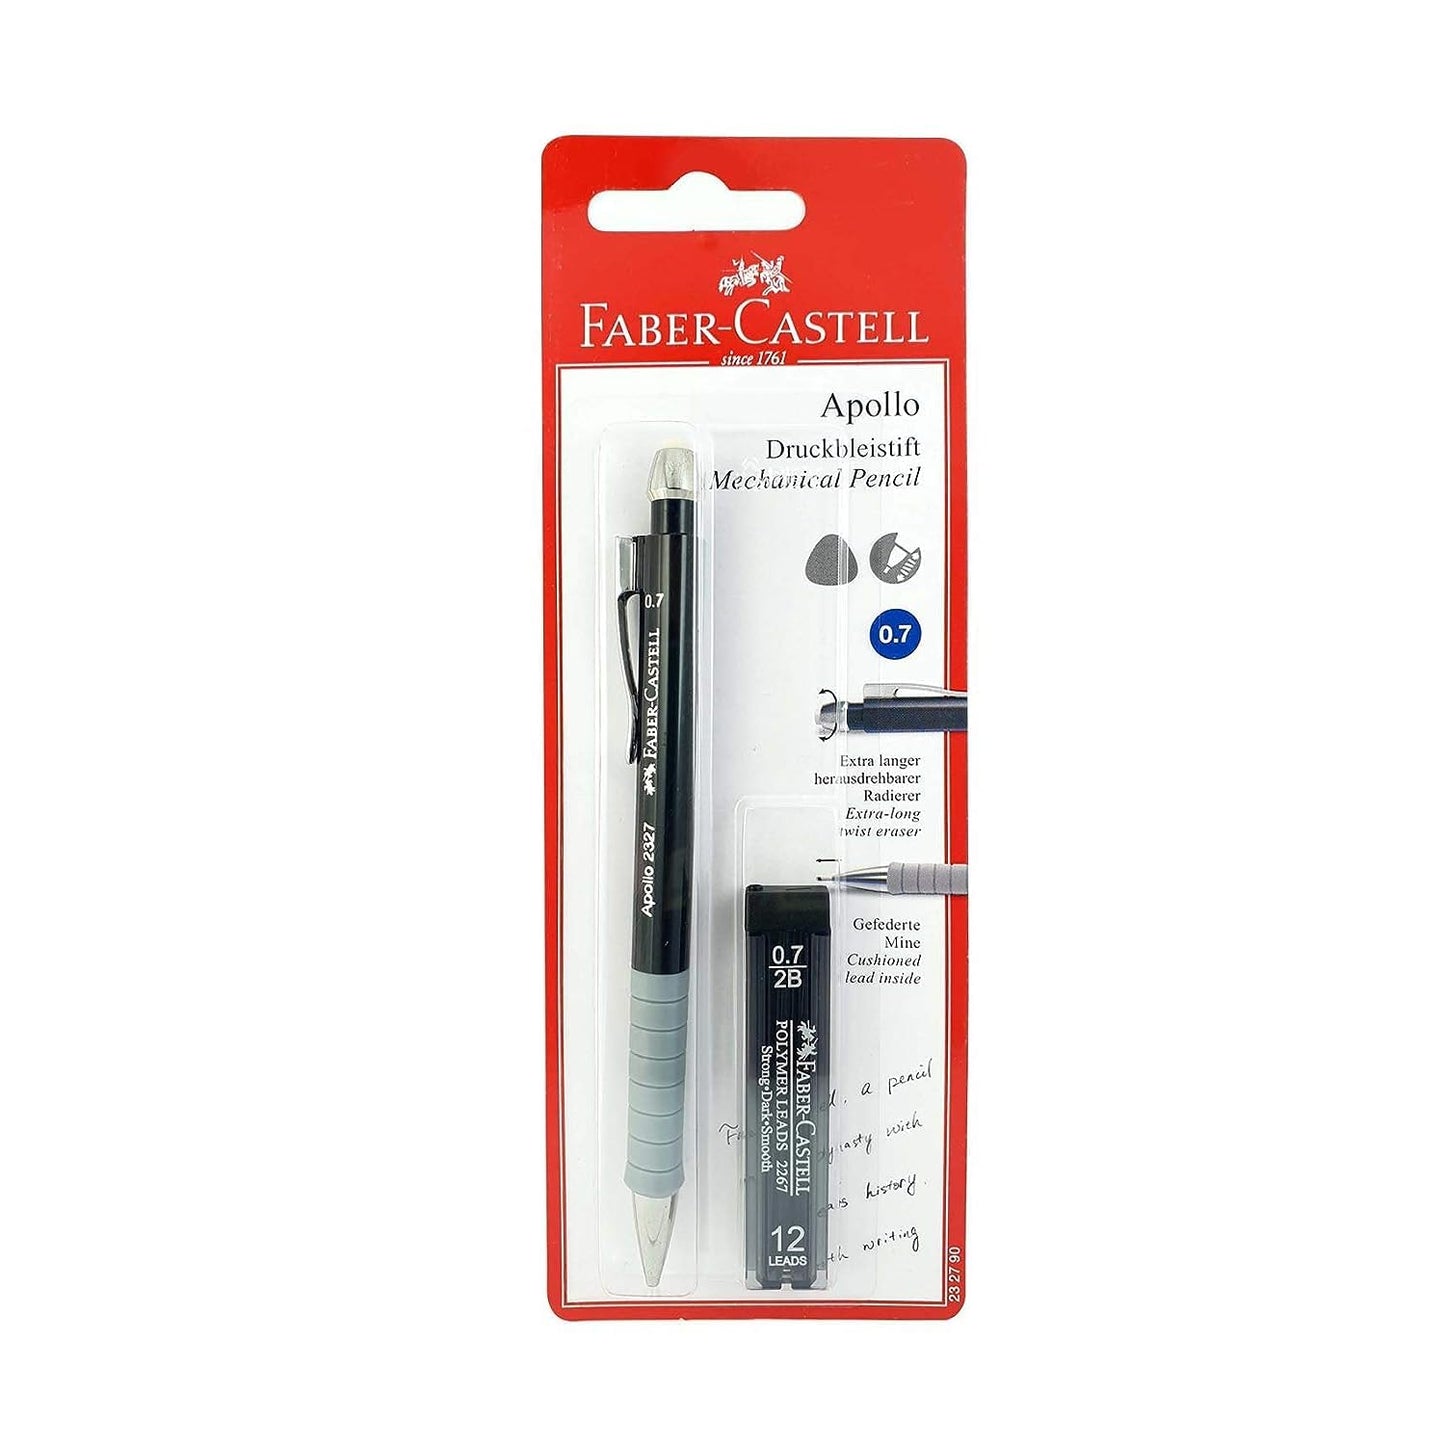 FABER-CASTELL APOLLO MECHANICAL PENCIL 0.7MM,Assorted